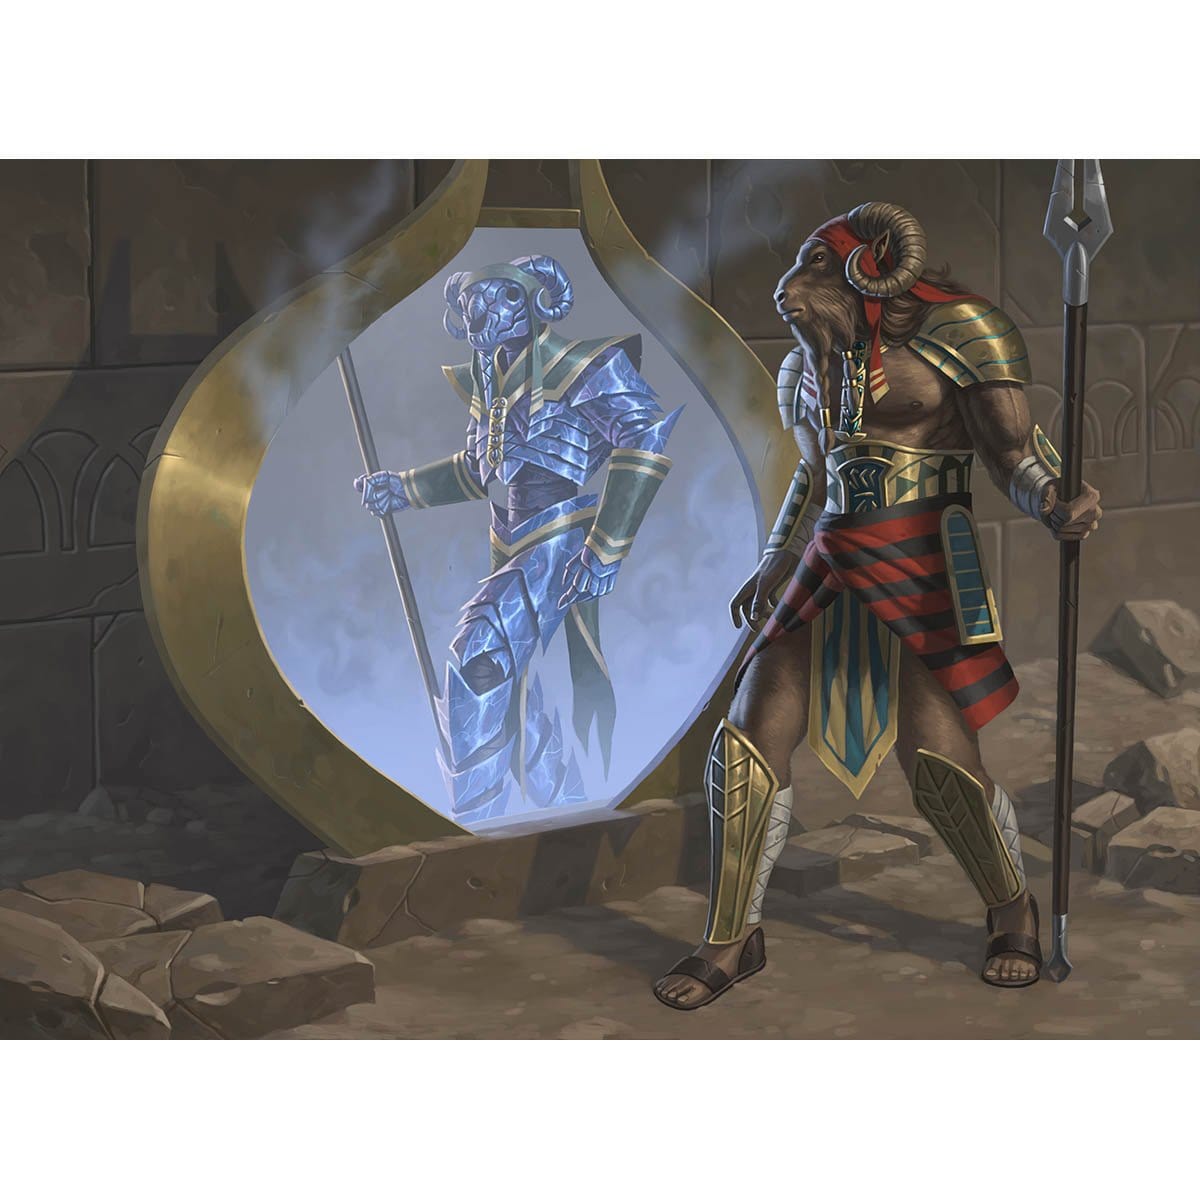 Mirage Mirror Print - Print - Original Magic Art - Accessories for Magic the Gathering and other card games